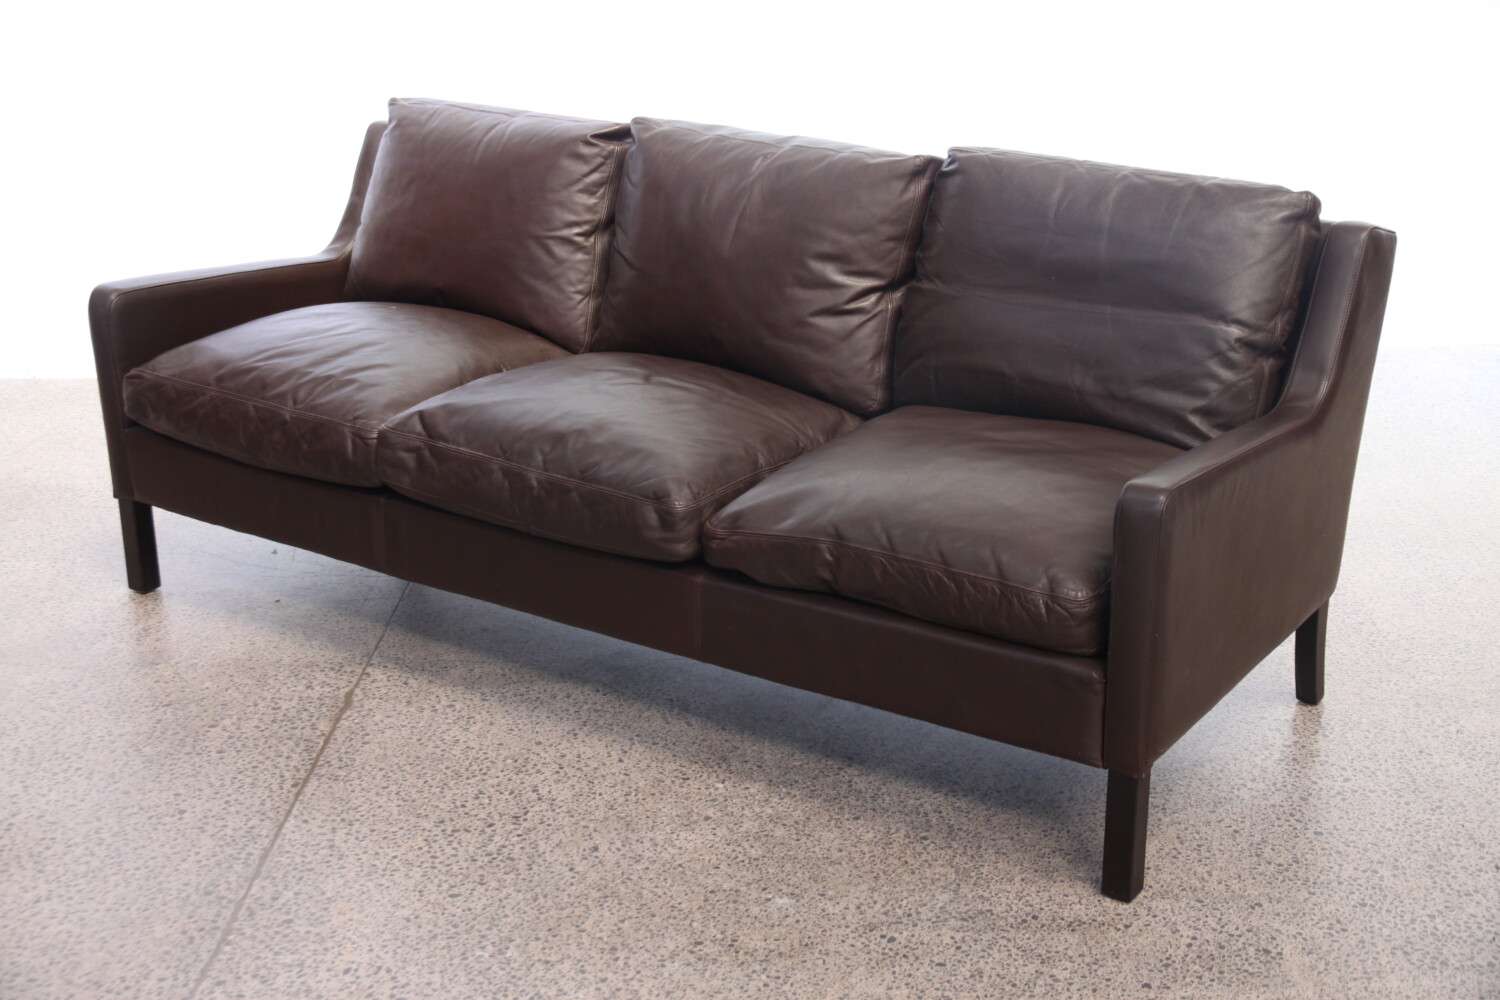 Pair Of Brown Leather Sofa